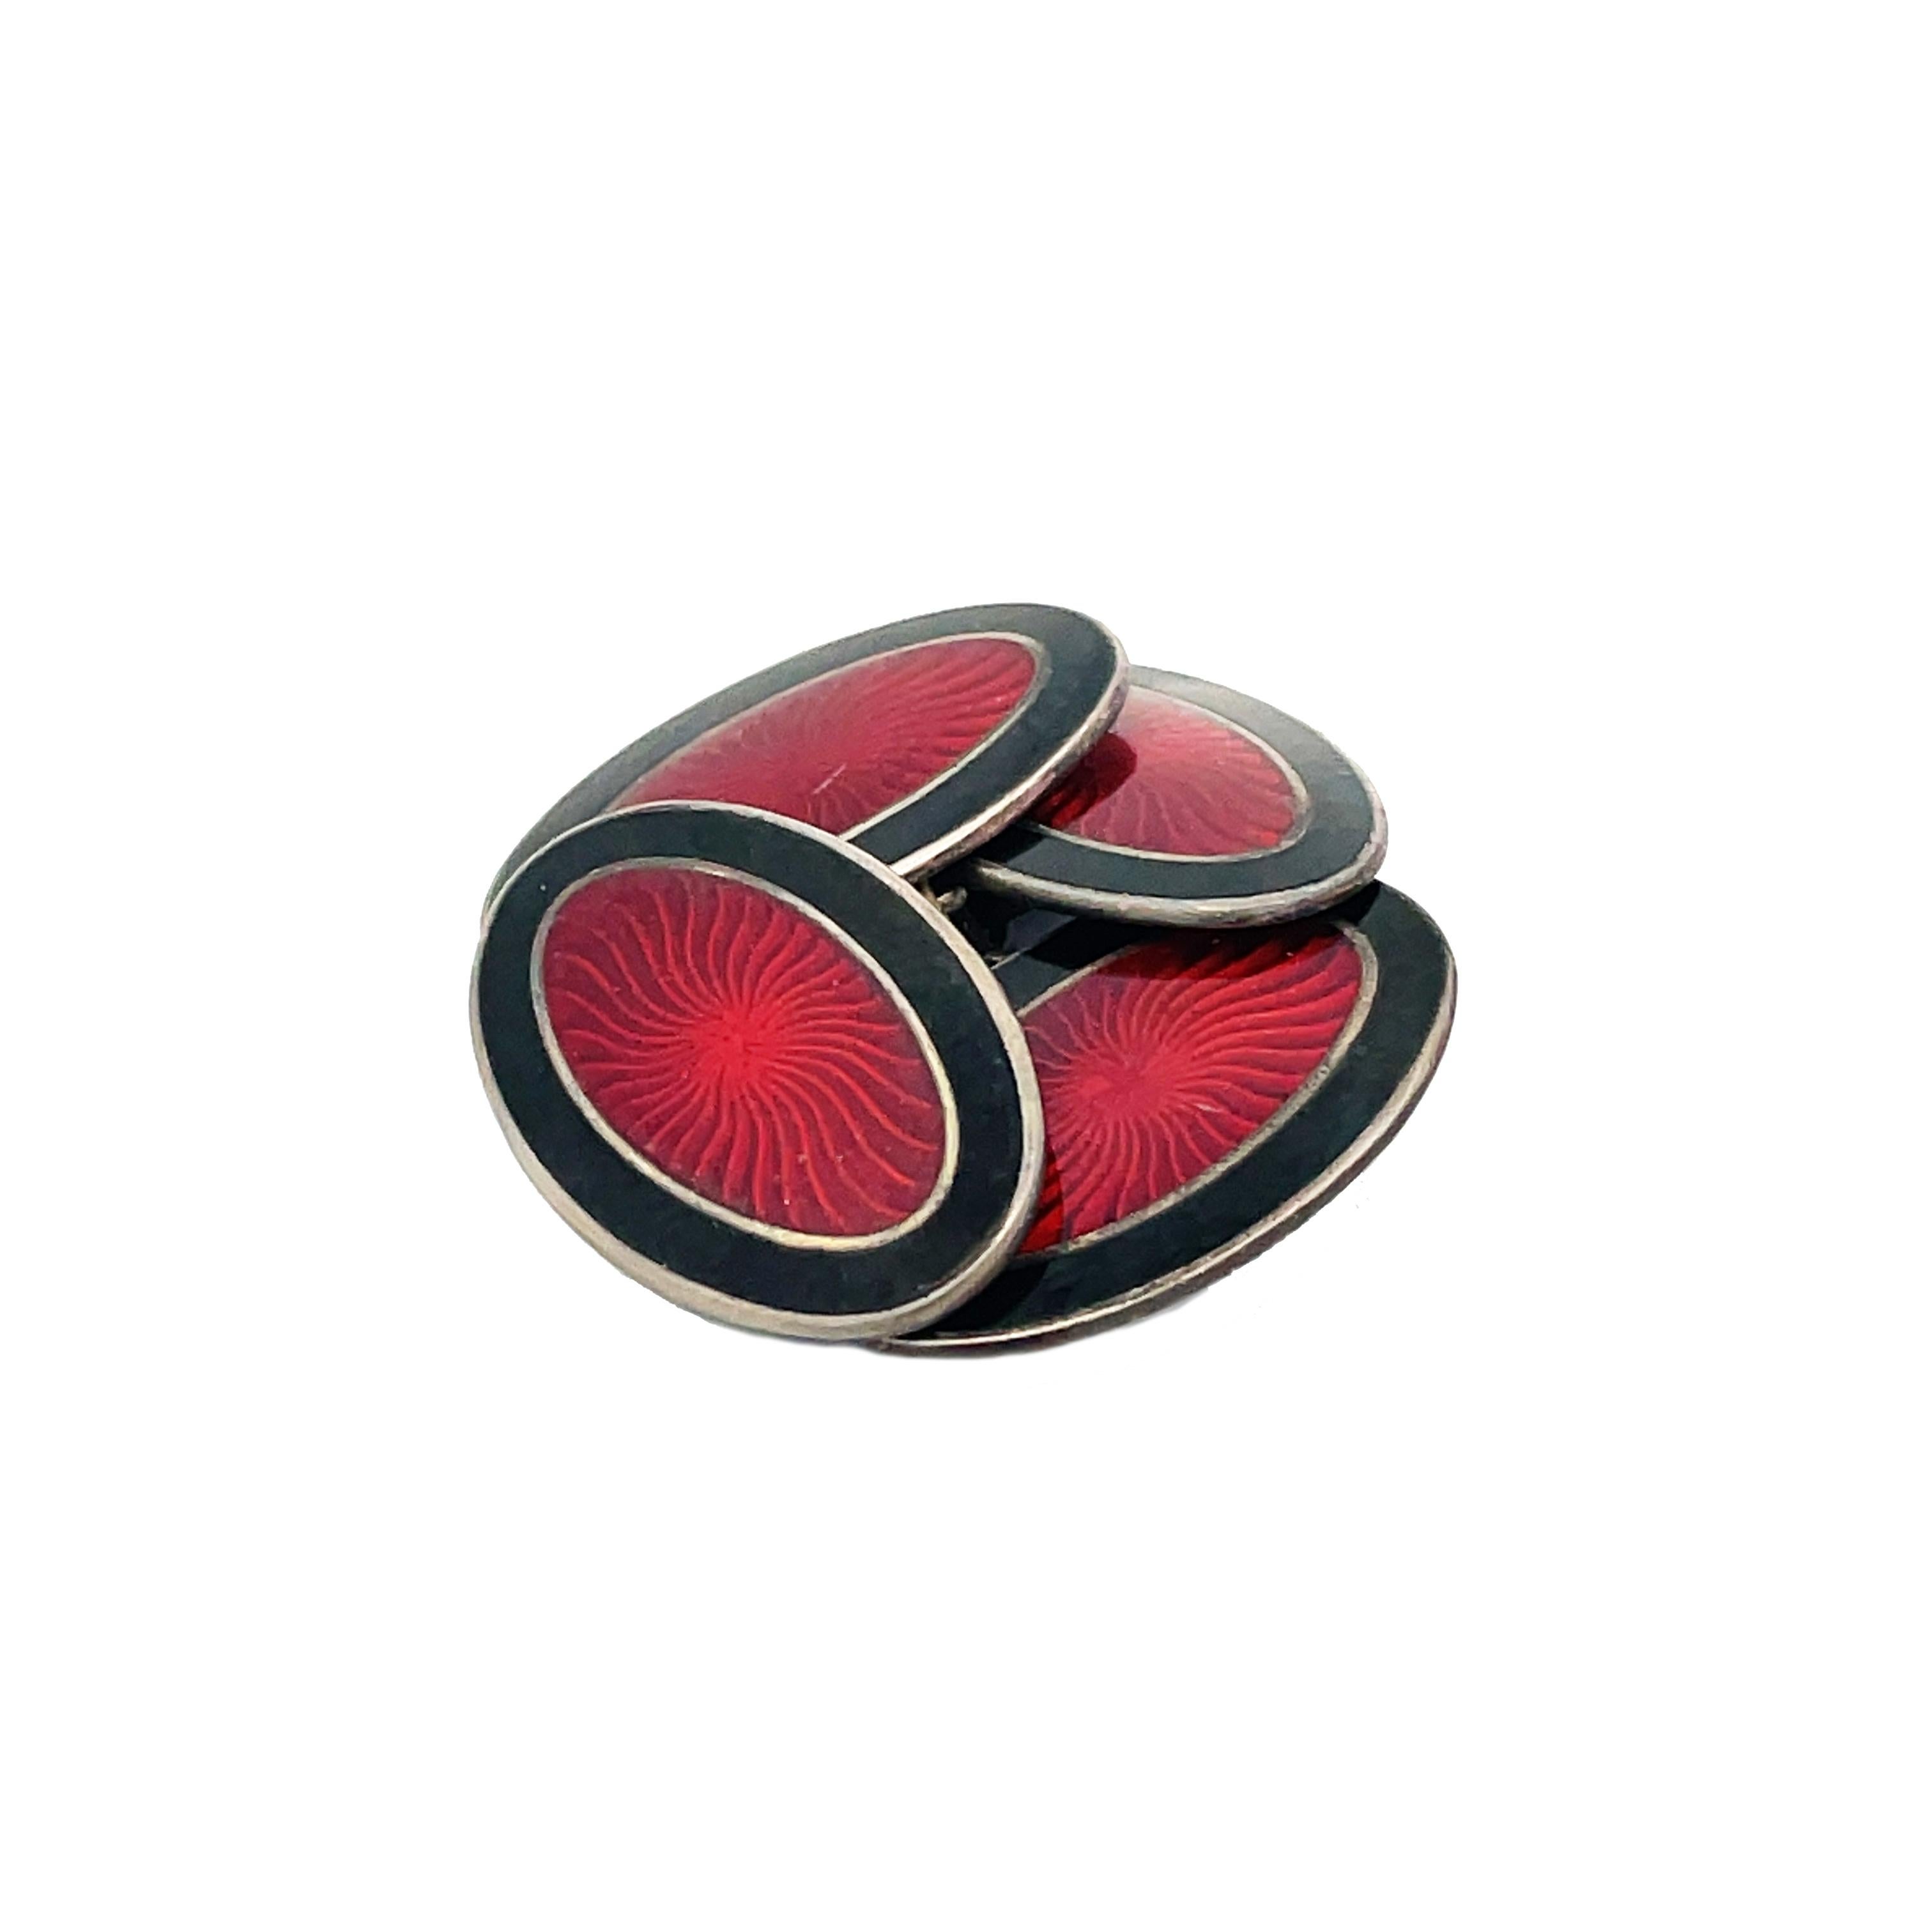 This is a stellar pair of Art Deco cufflinks crafted in sterling silver showcases a stunning red center and black enamel border. The enamel beautiful and vibrant and is in excellent condition. The dark black enameled border frames the vivid